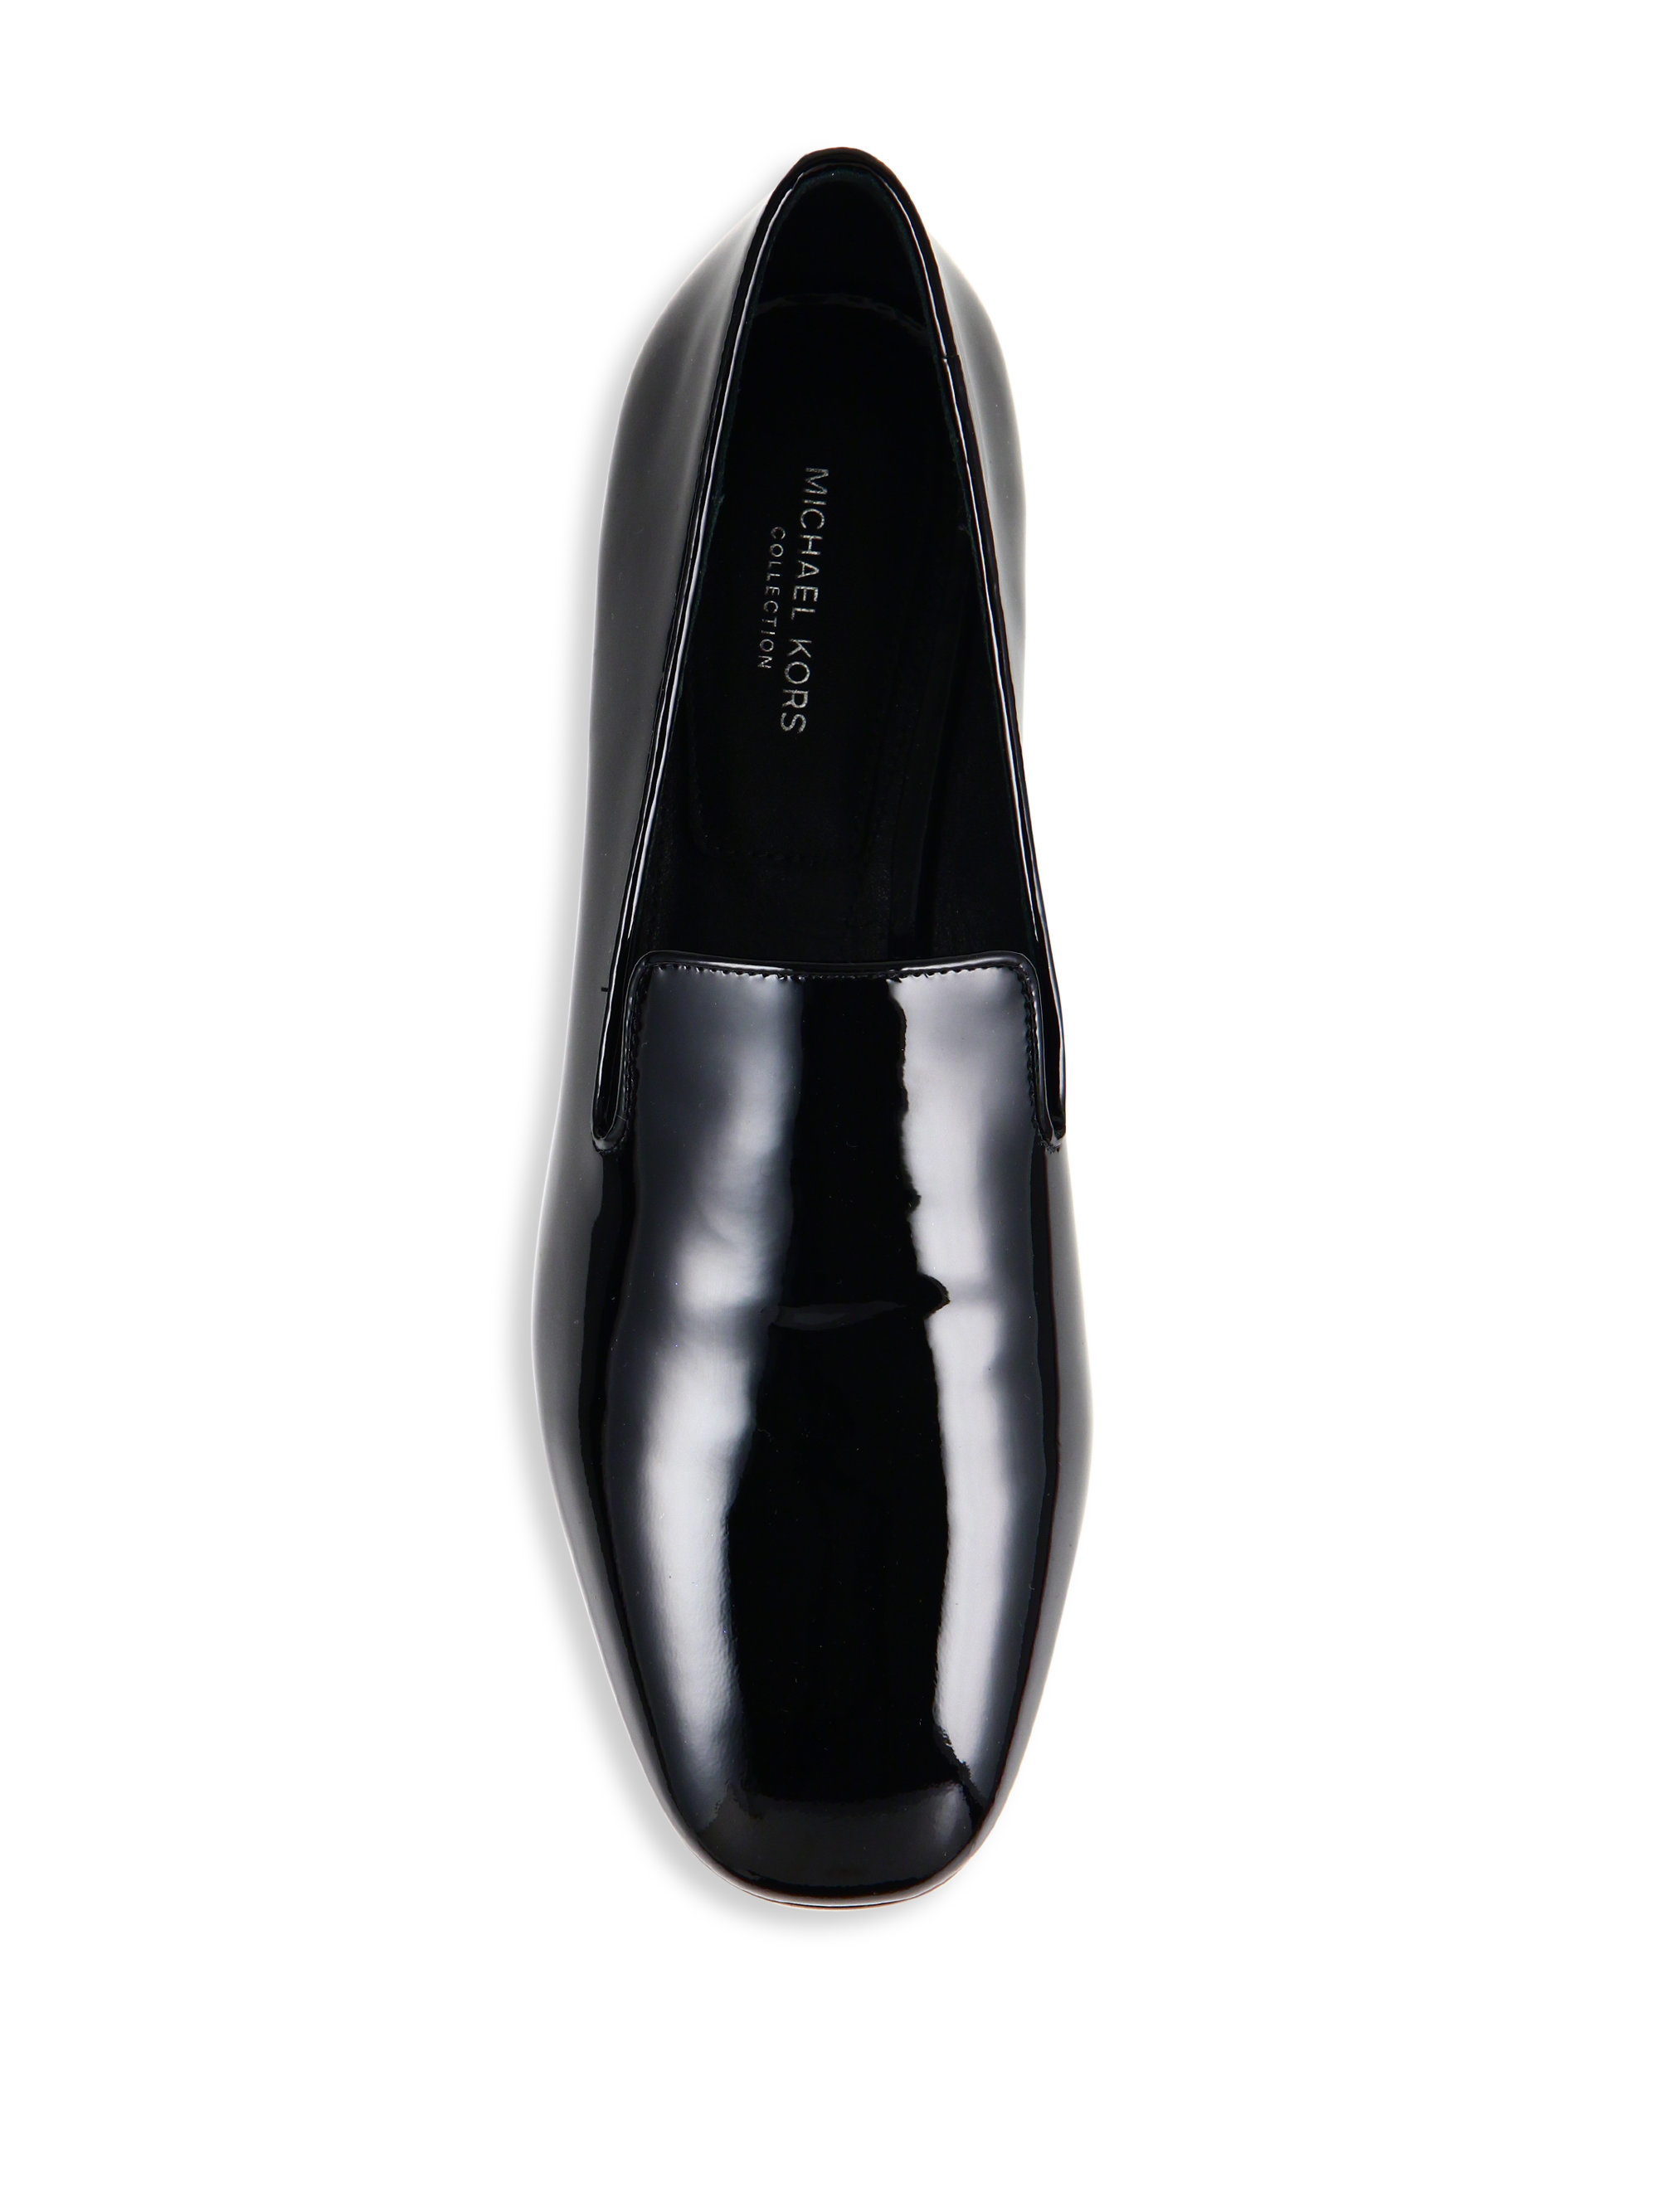 Michael Kors Roxanne Patent Leather Loafers in Black - Lyst